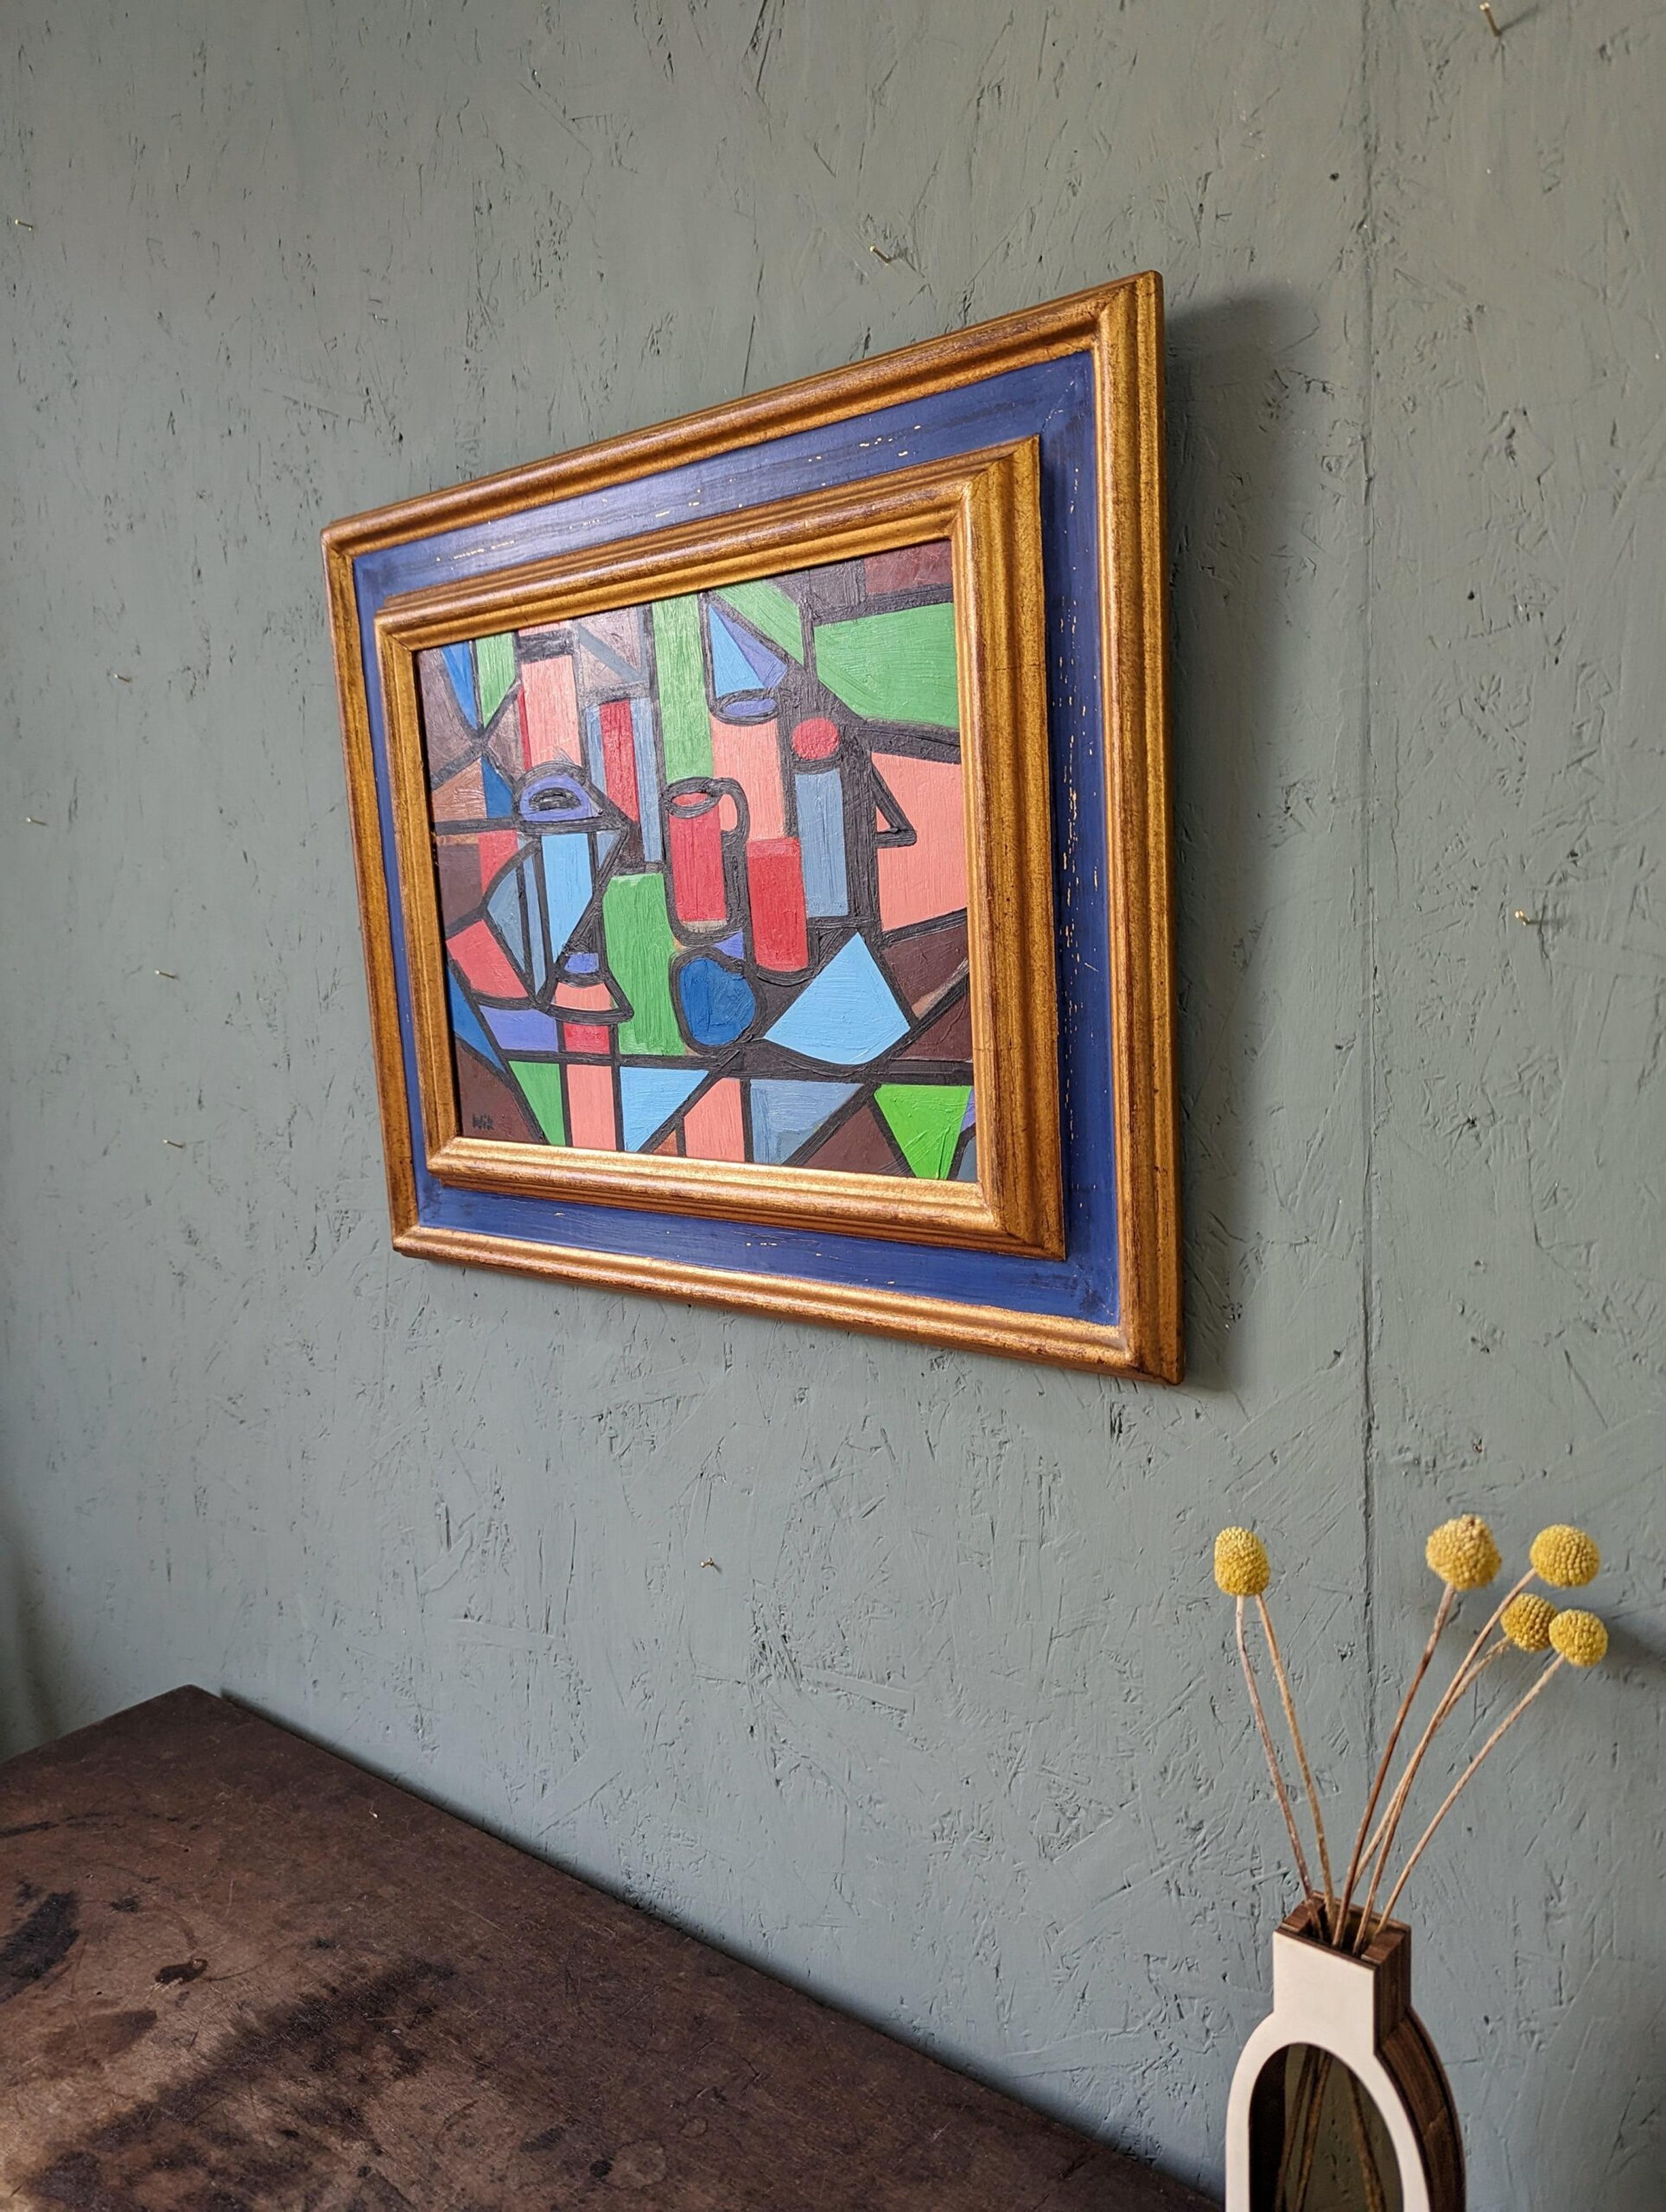 GEOMETRIC STILL LIFE
Size: 41.5 x 49.5 cm (including frame)
Oil on board

A vibrant and playful mid century cubist modernist composition in oil, painted on board.

With a focus on shape, colour and line, the artist has abstracted what appears to be